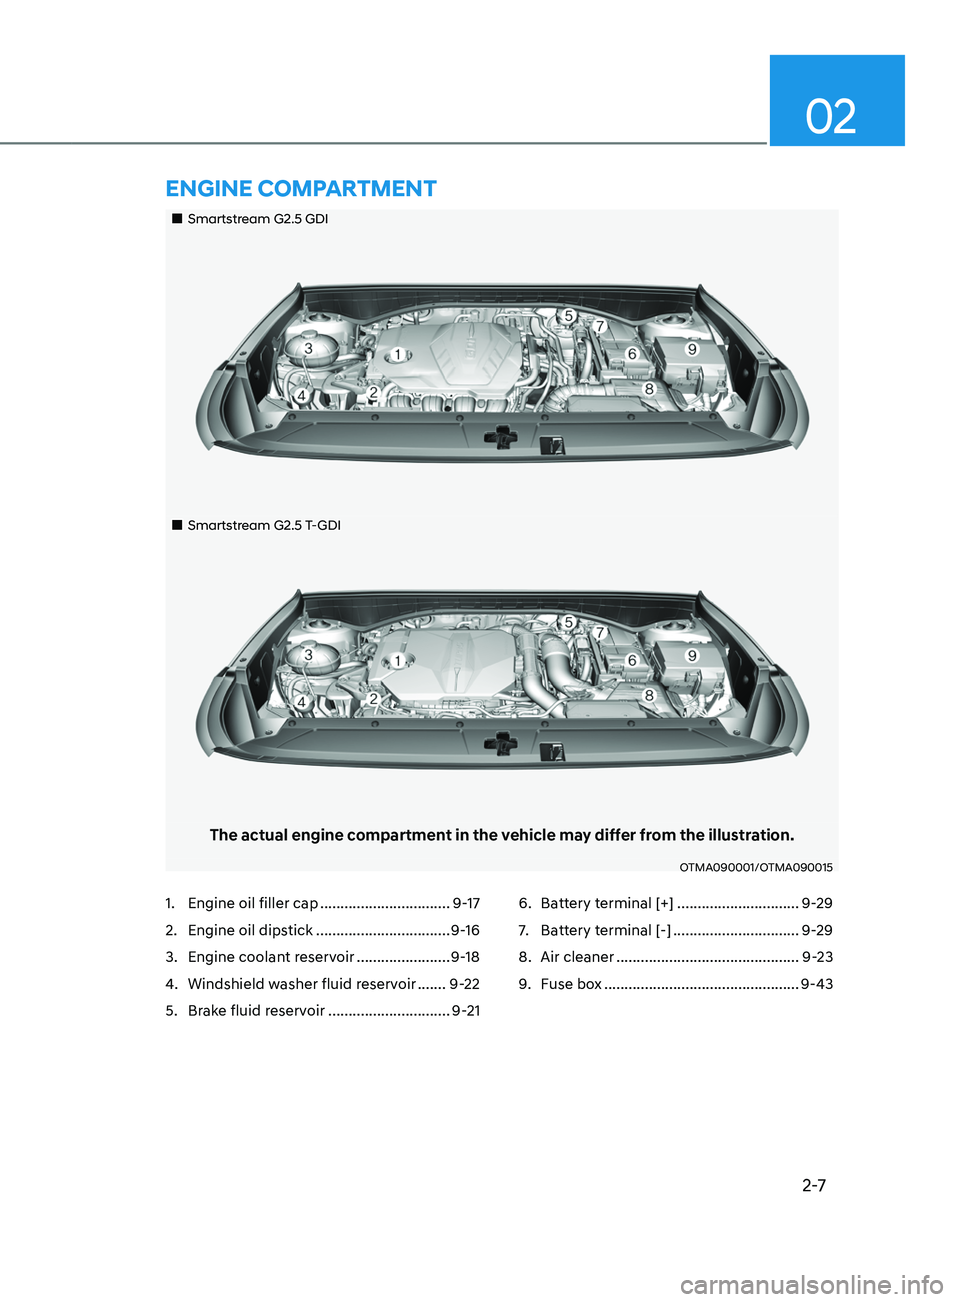 HYUNDAI SANTA FE LIMITED 2021 Owners Manual 2-7
02
„„Smartstream G2.5 GDI
„„Smartstream G2.5 T-GDI
The actual engine compartment in the vehicle may differ from the illustration.
OTMA090001/OTMA090015
1. Engine oil filler cap